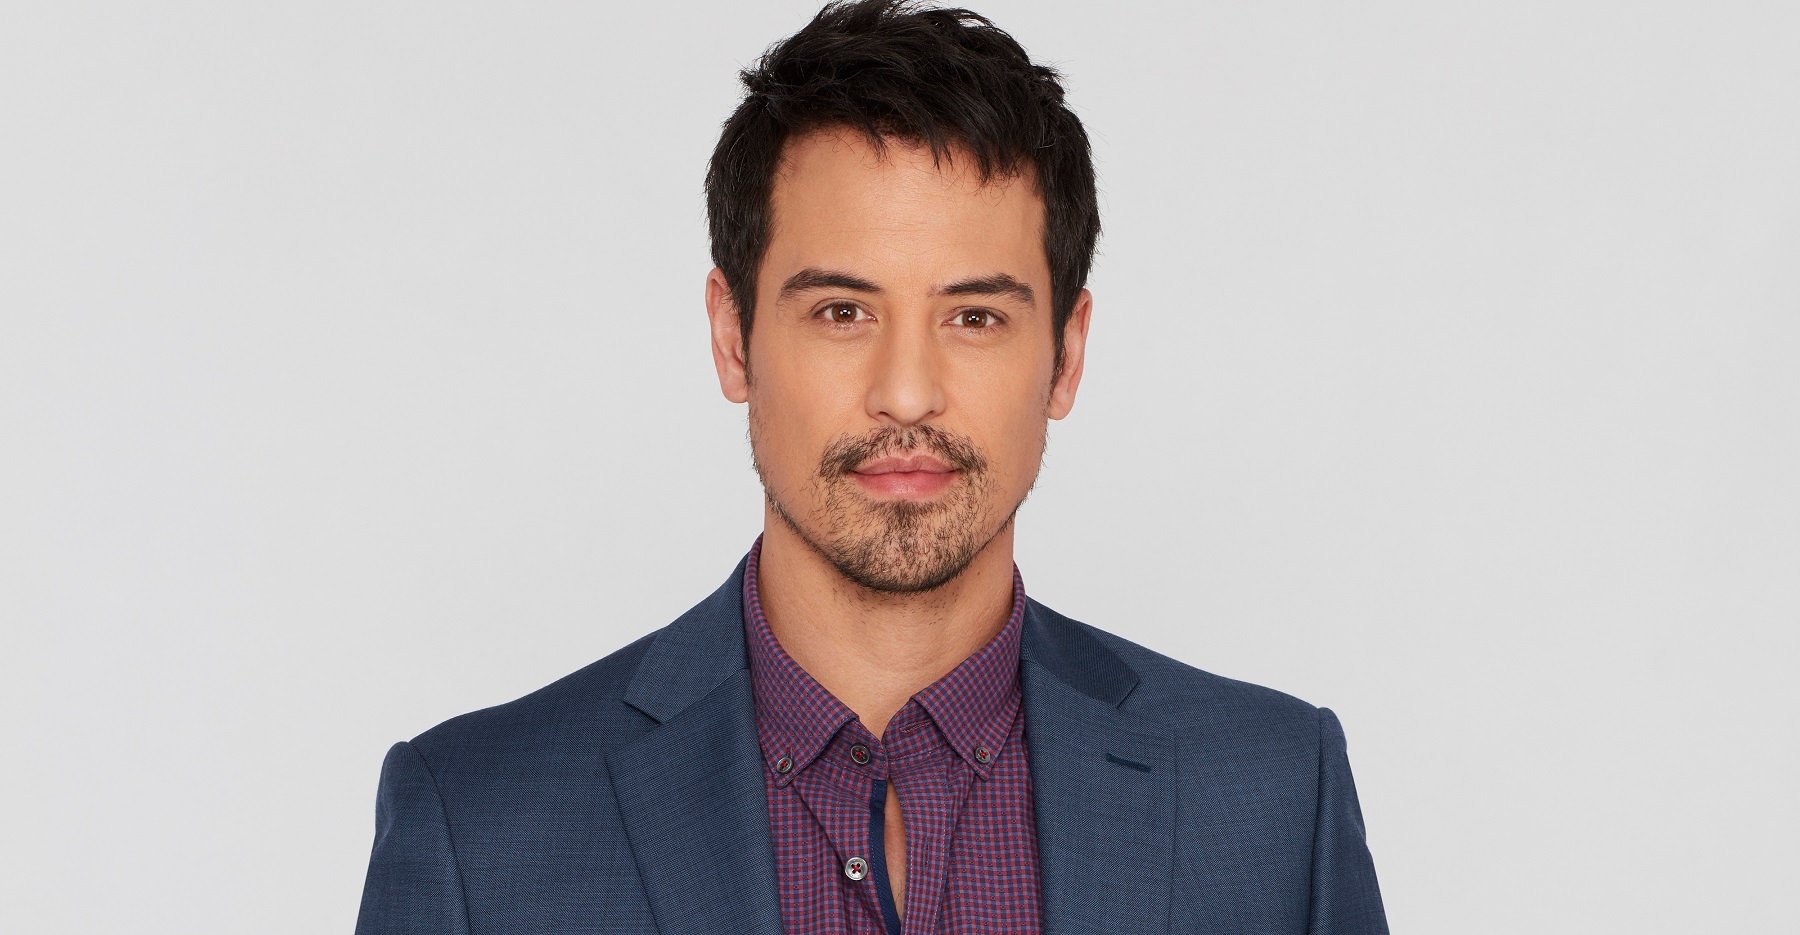 General Hospital Comings and Goings feature Marcus Coloma, pictured here in a grey jacket and purple shirt